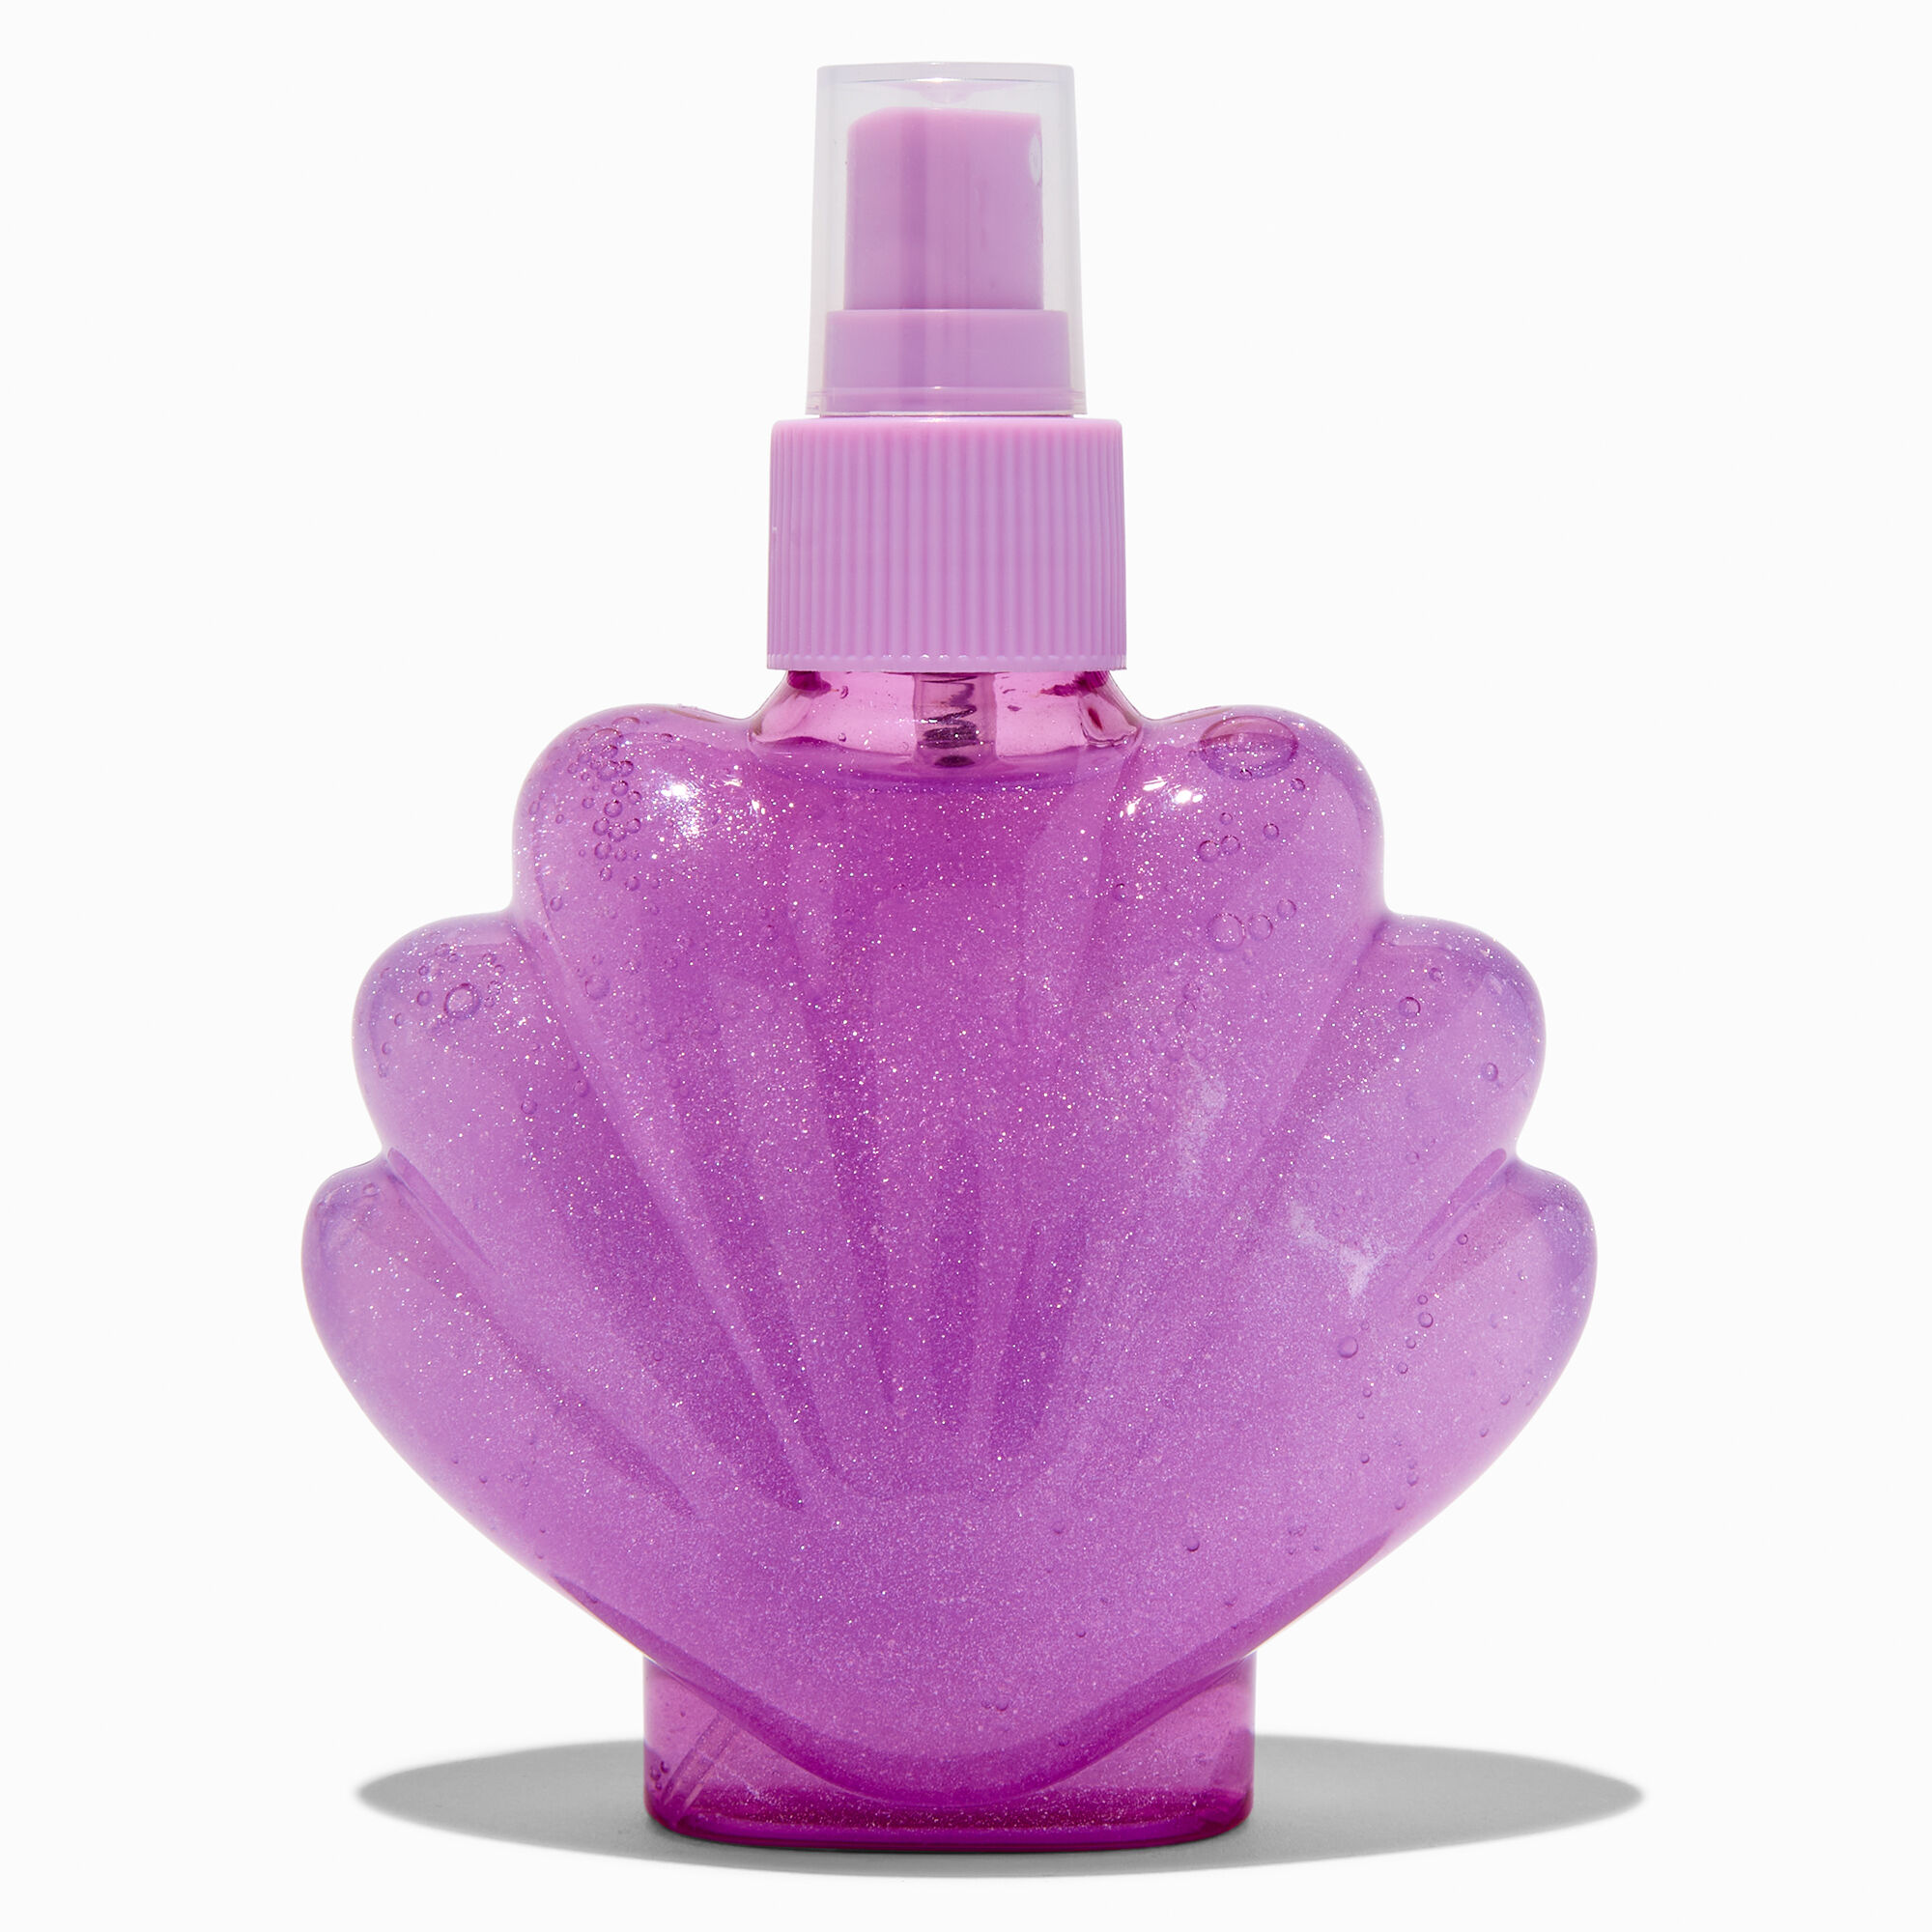 View Claires Shell Body Mist Purple information